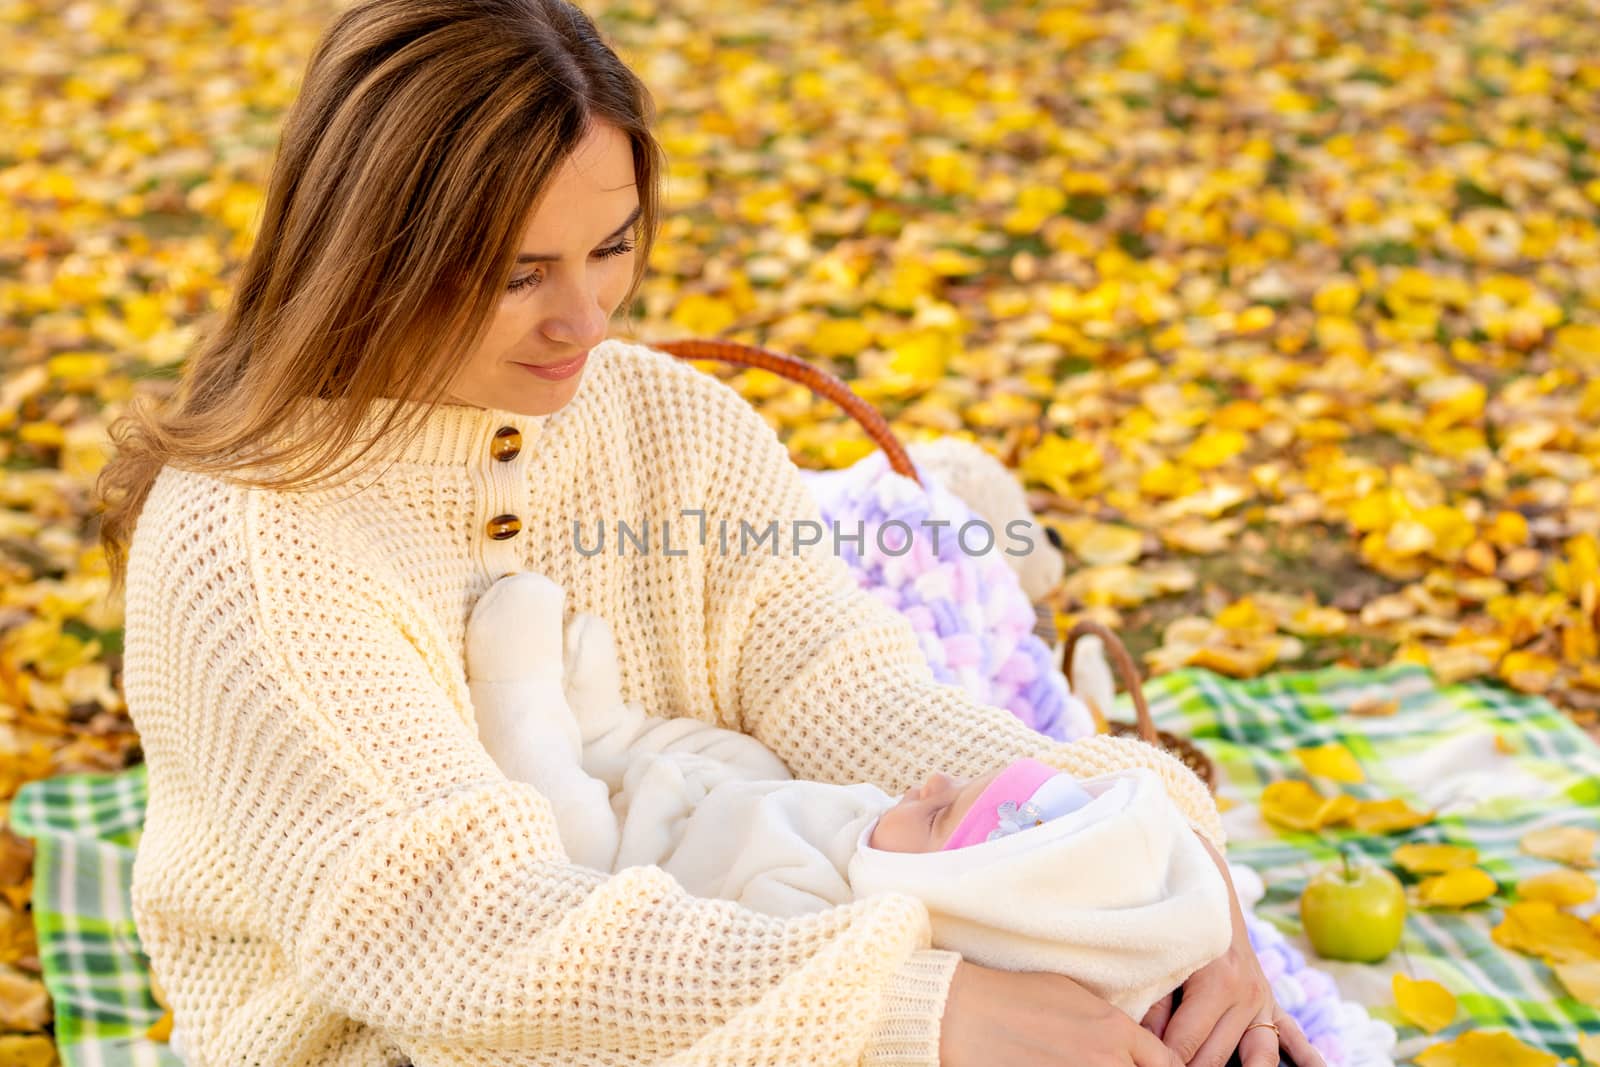 Mom looks lovingly at baby as she sits down for a picnic in the park